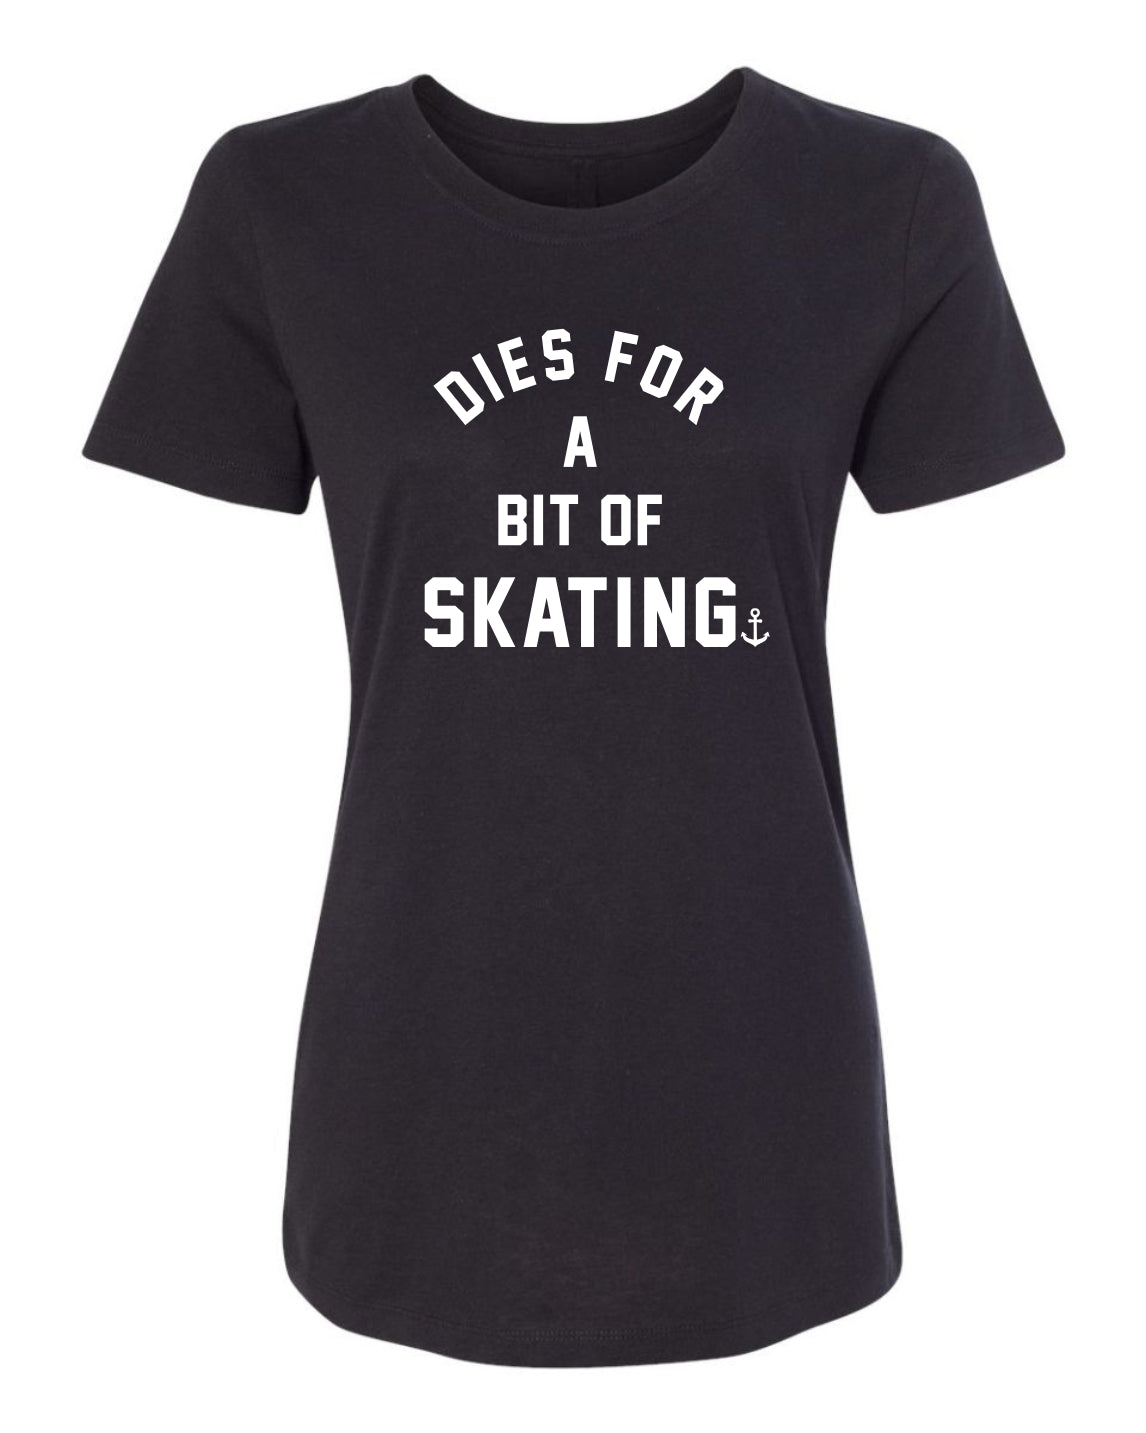 "Dies For A Bit Of Skating" T-Shirt